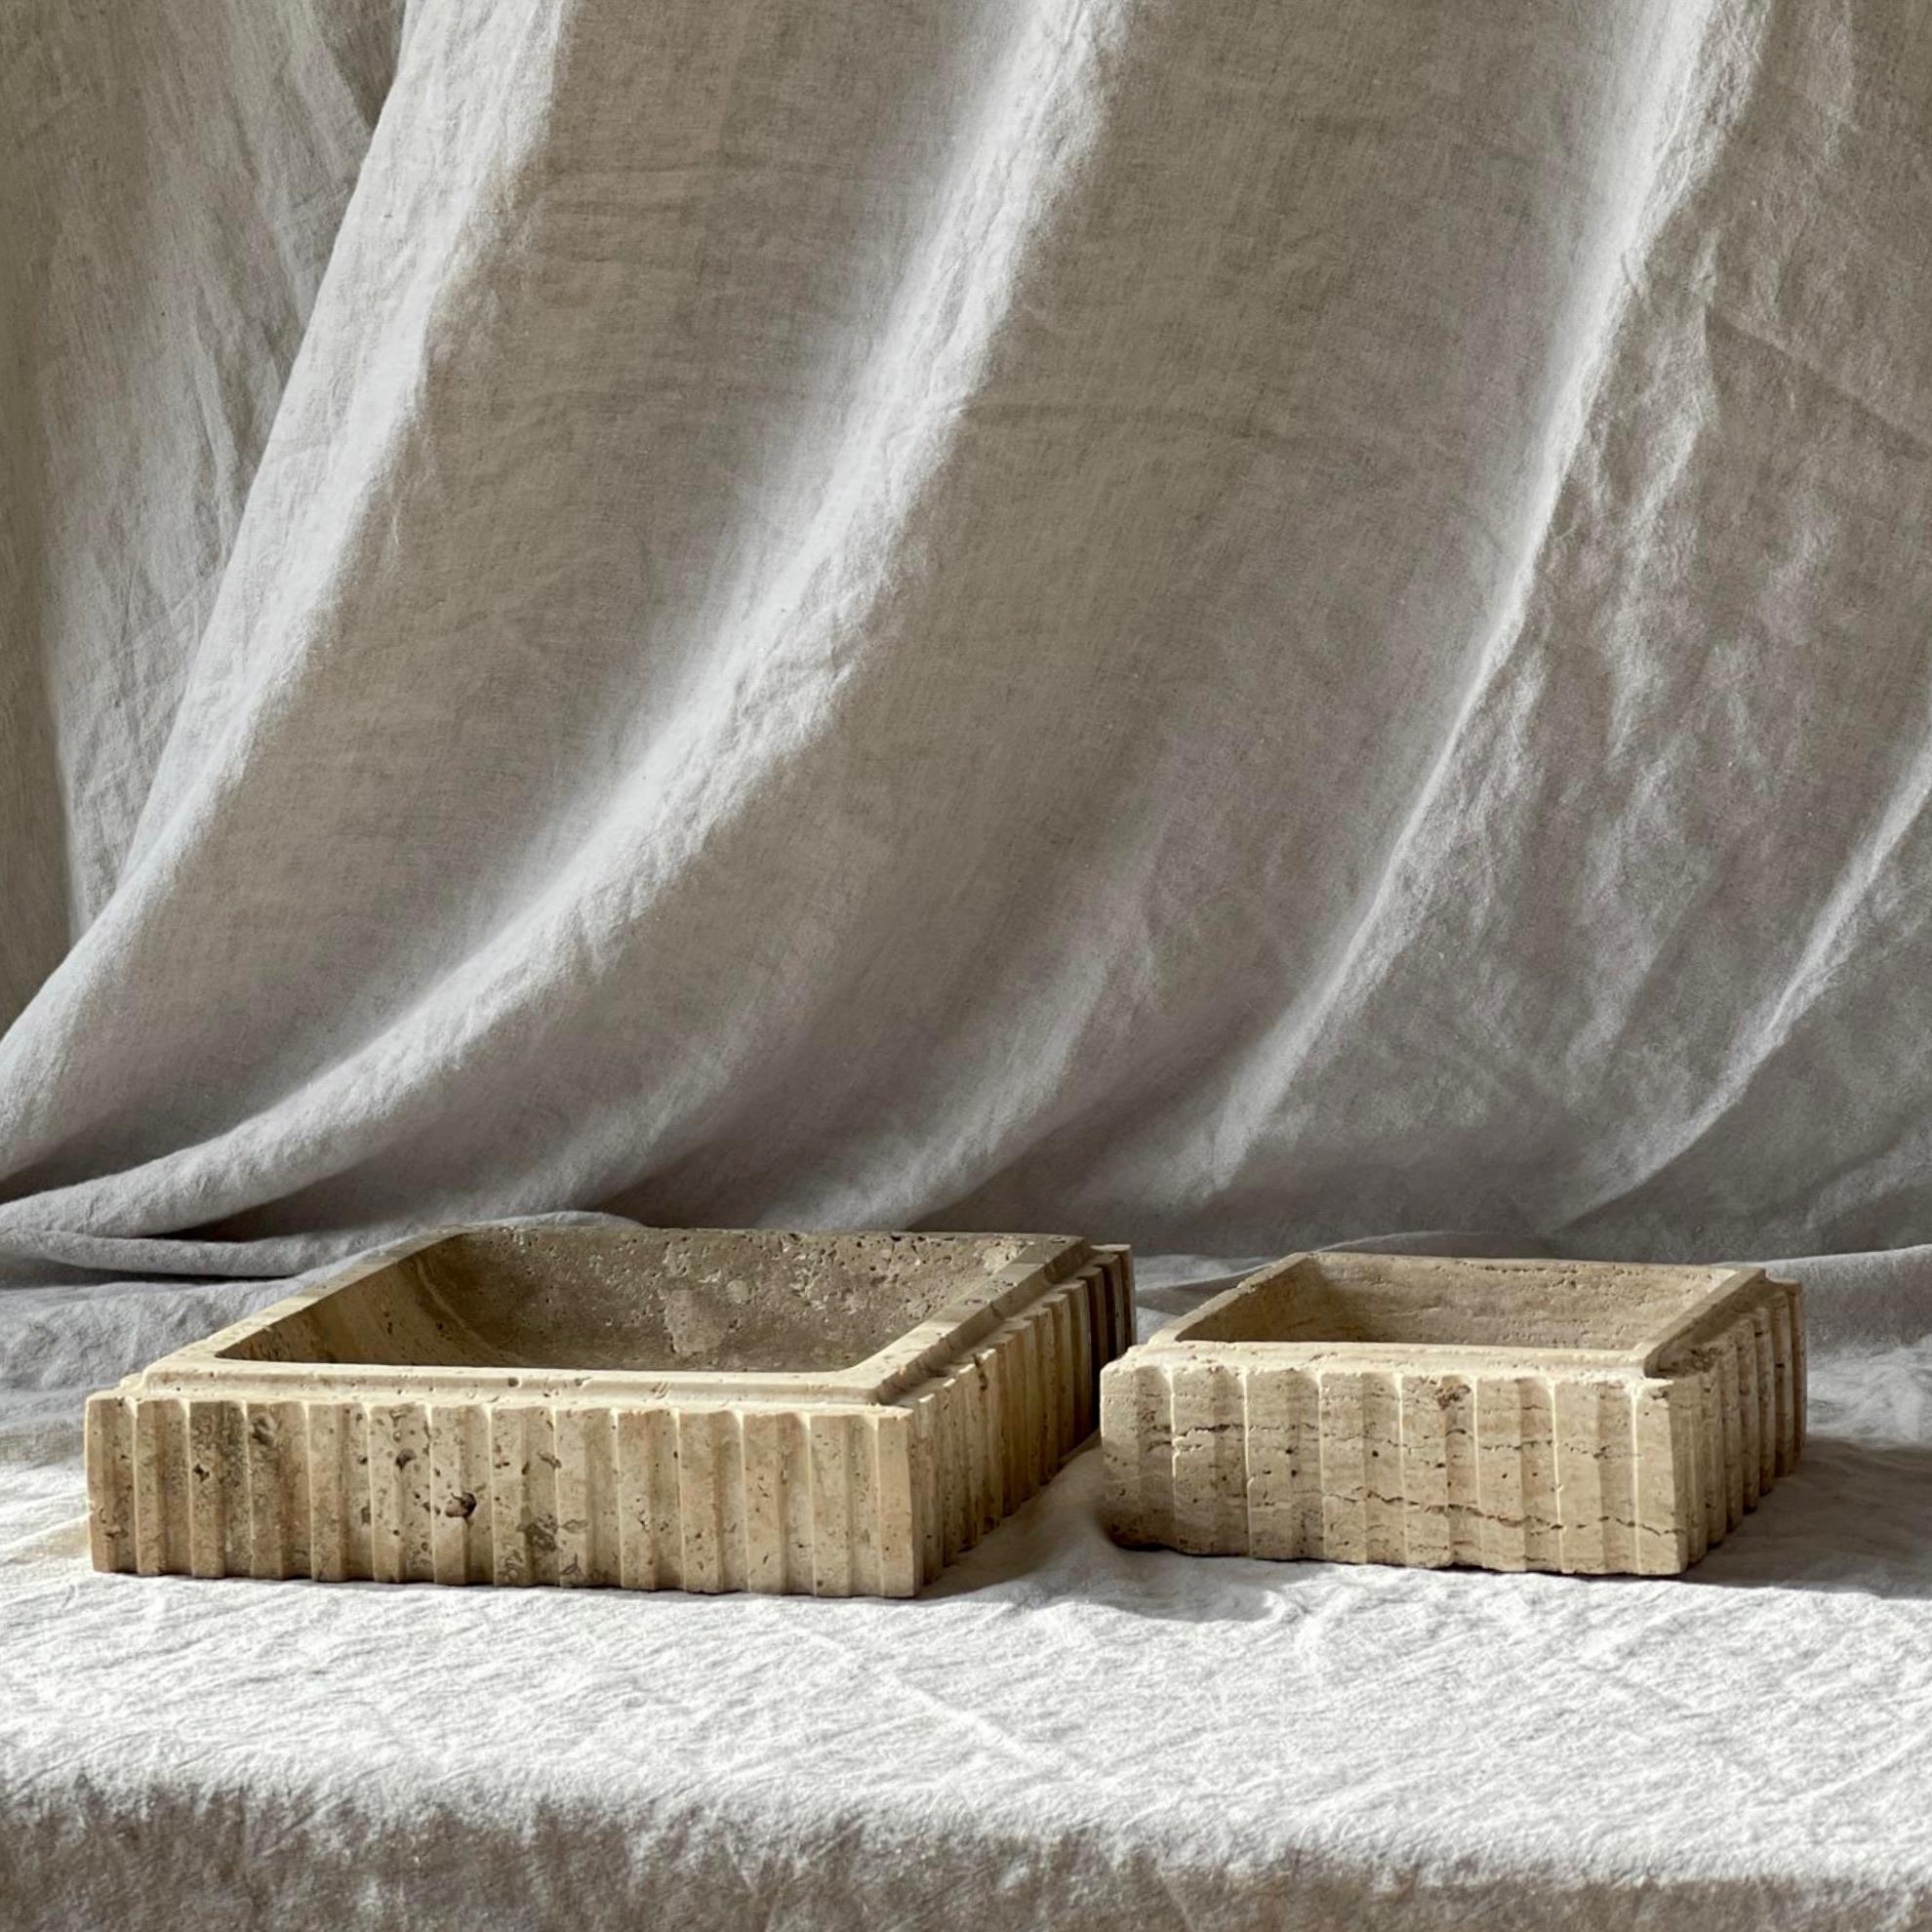 The Athens Catch is a limited production functional object d'art by Anastasio Home. 

Crafted from a single piece of solid stone, this substantial nine by nine inch square bowl showcases roughly fluted sides, meticulously hand-finished by skilled